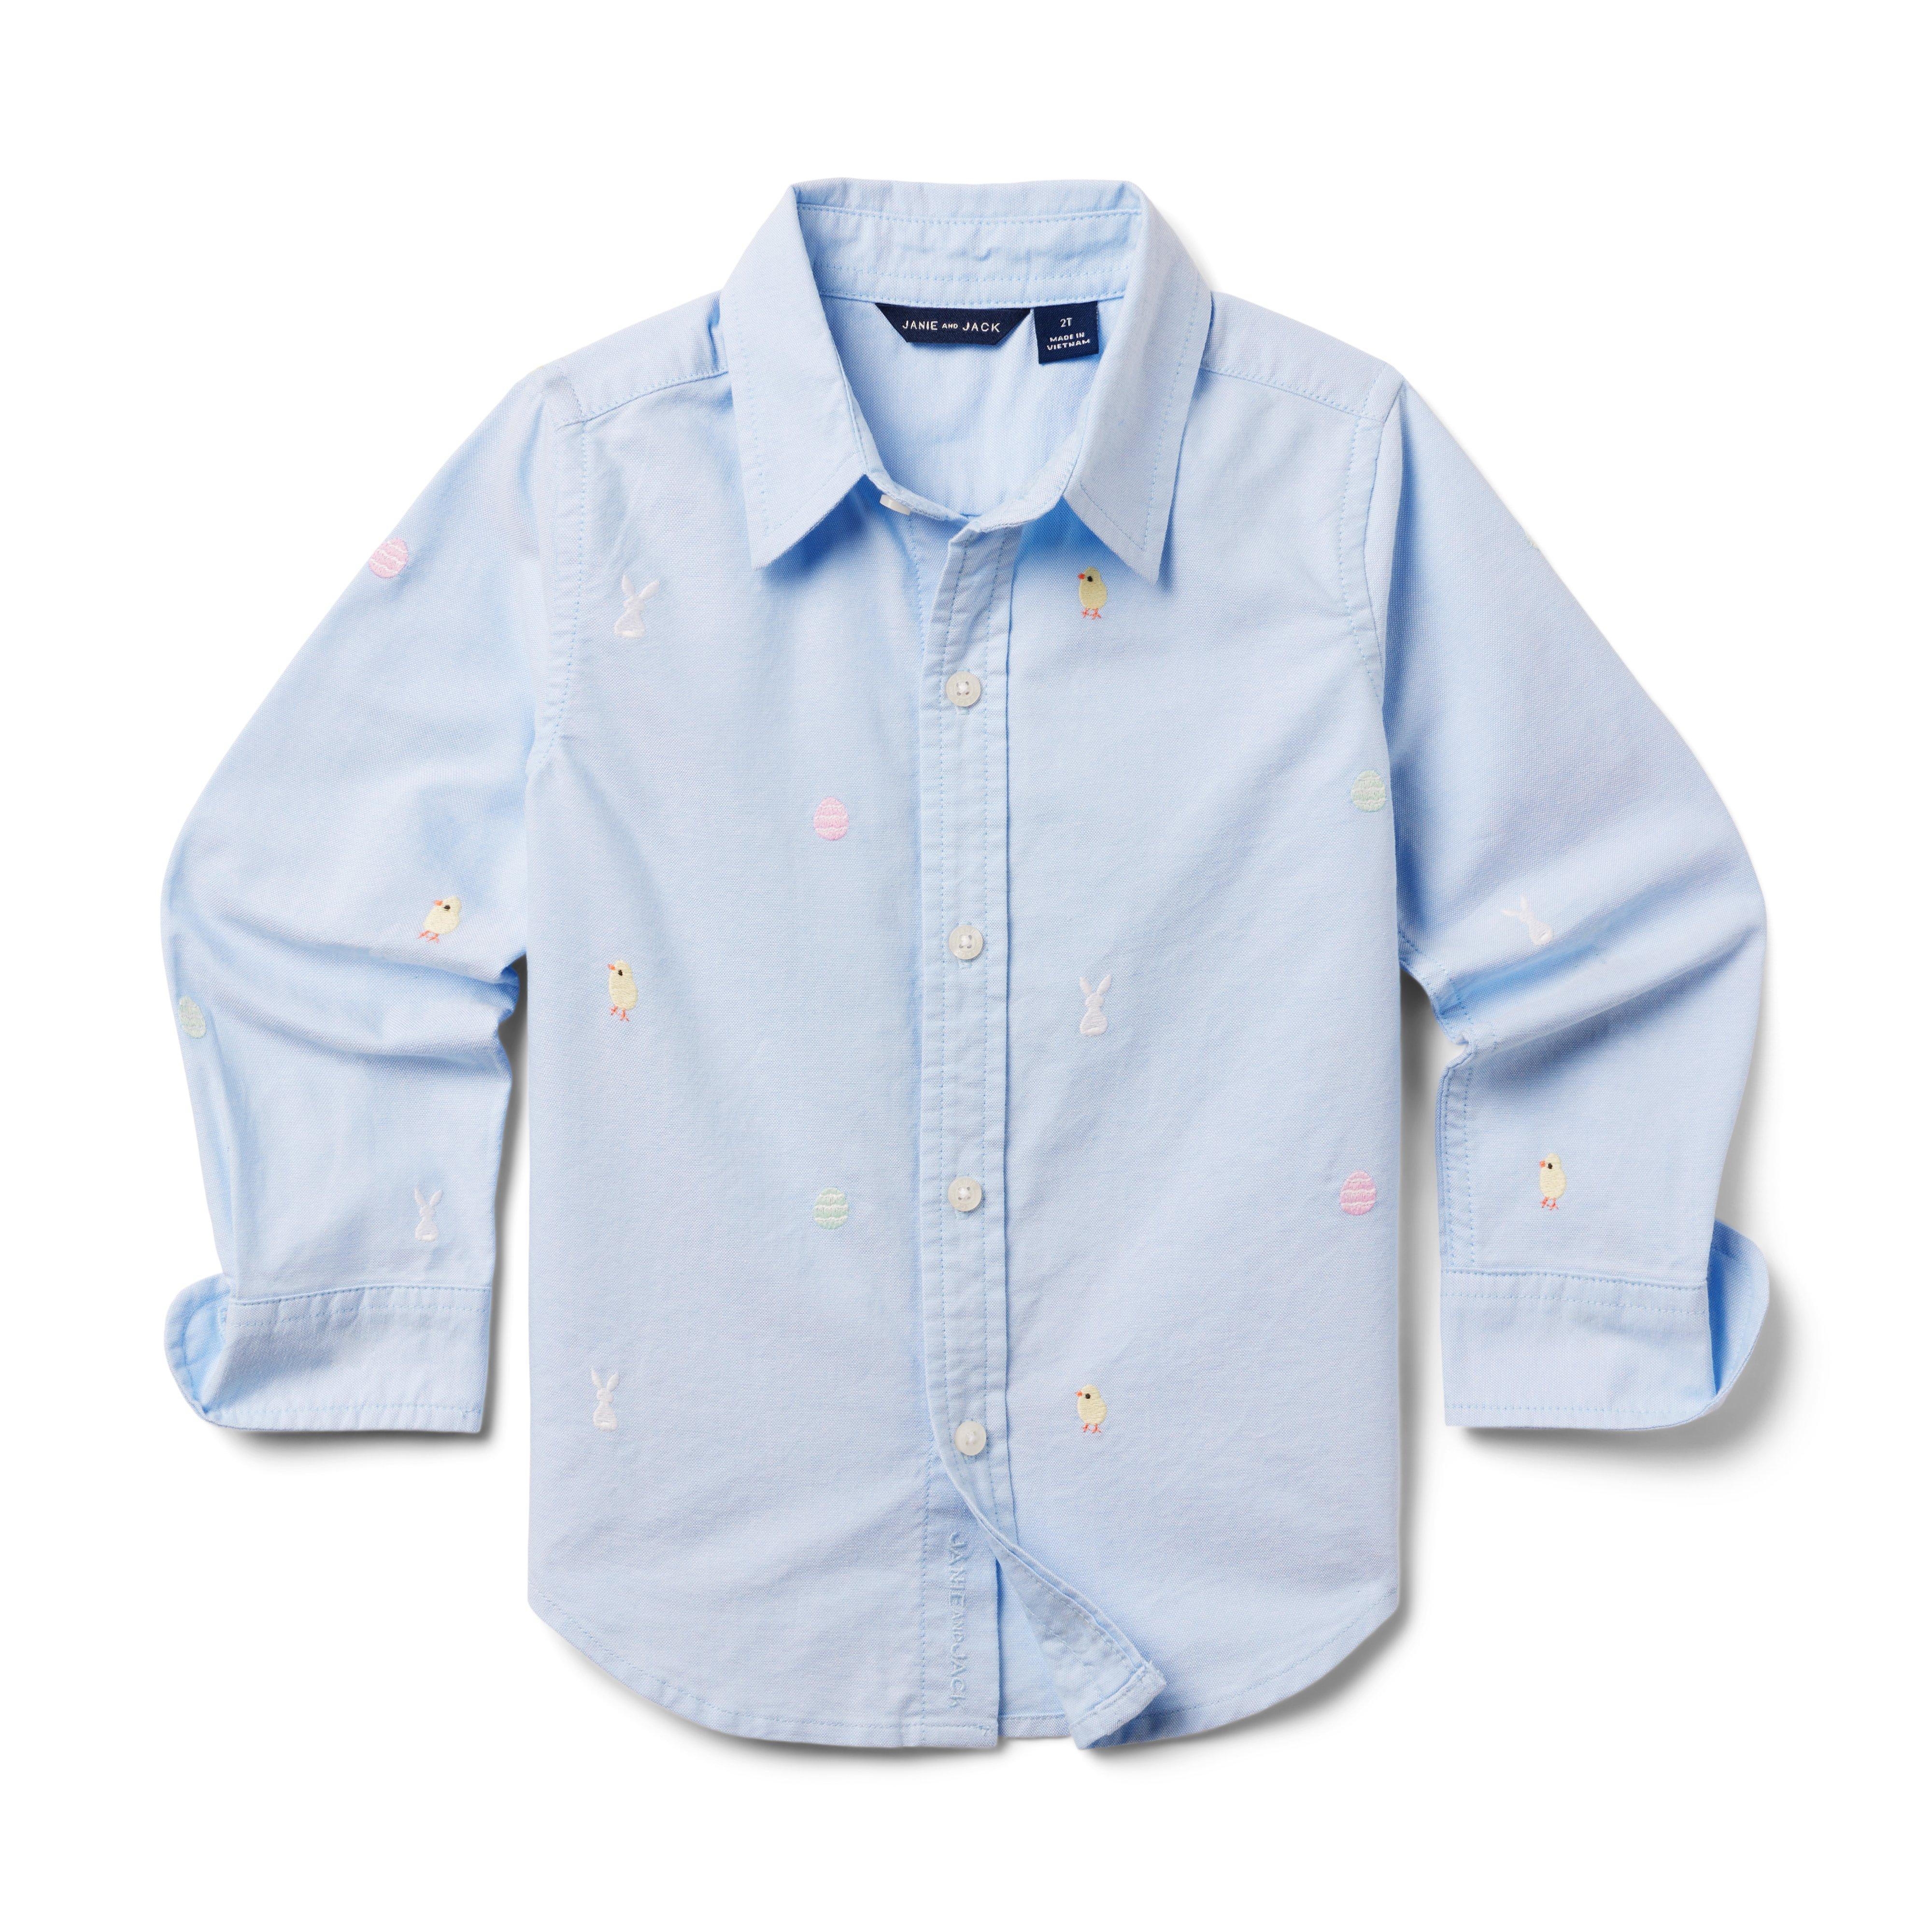 The Embroidered Oxford Shirt